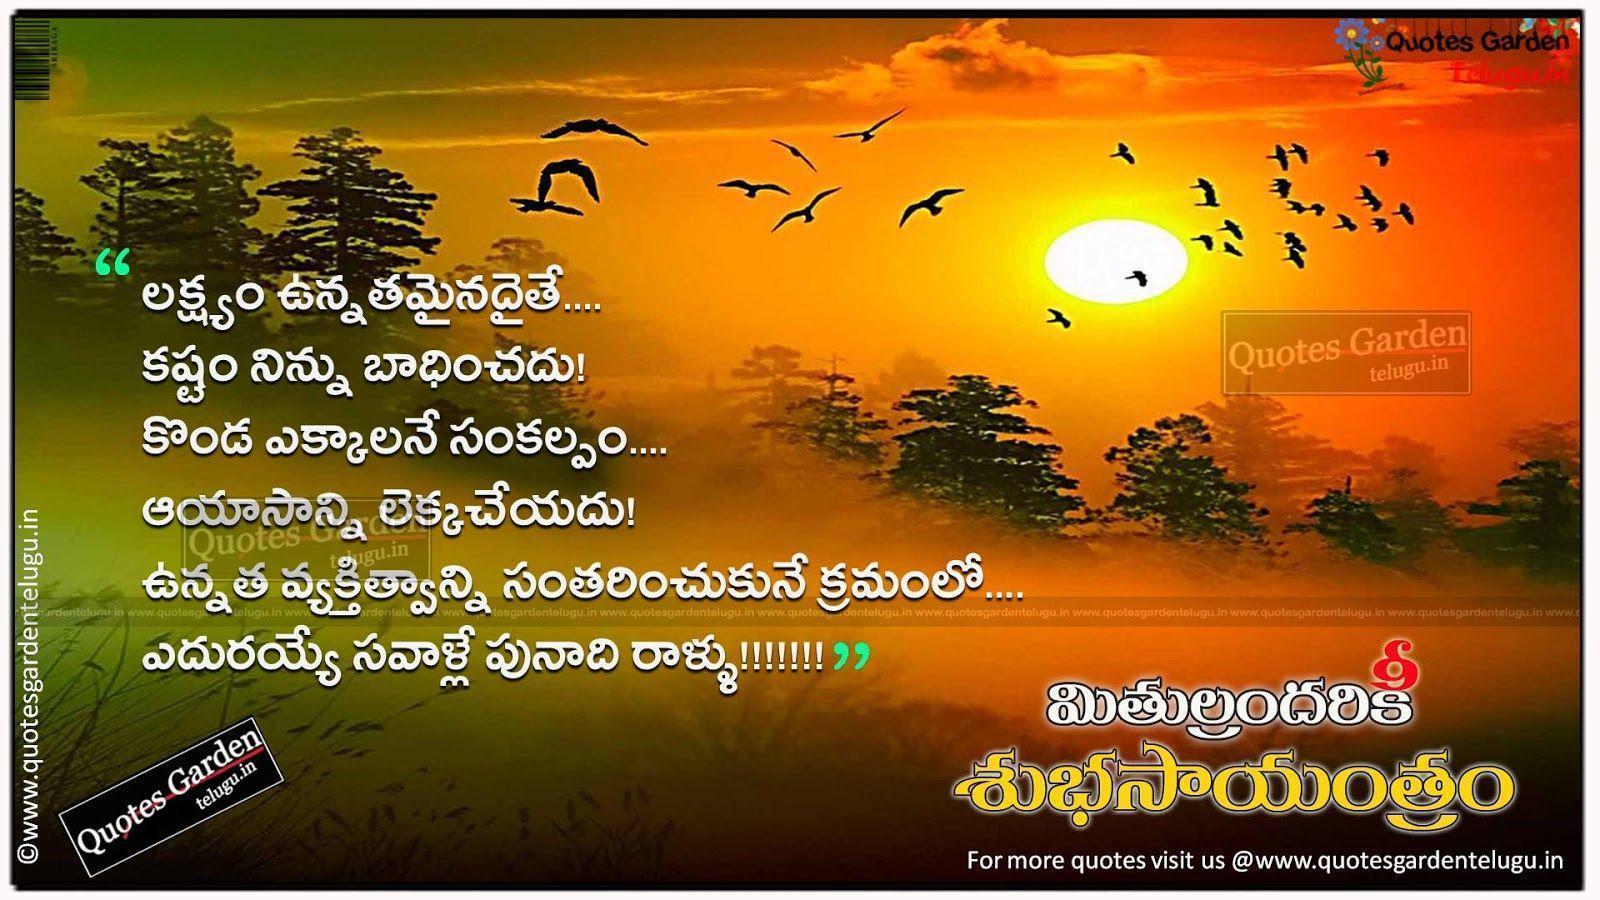 Telugu good evening Quotes With HD wallpaper. QUOTES GARDEN